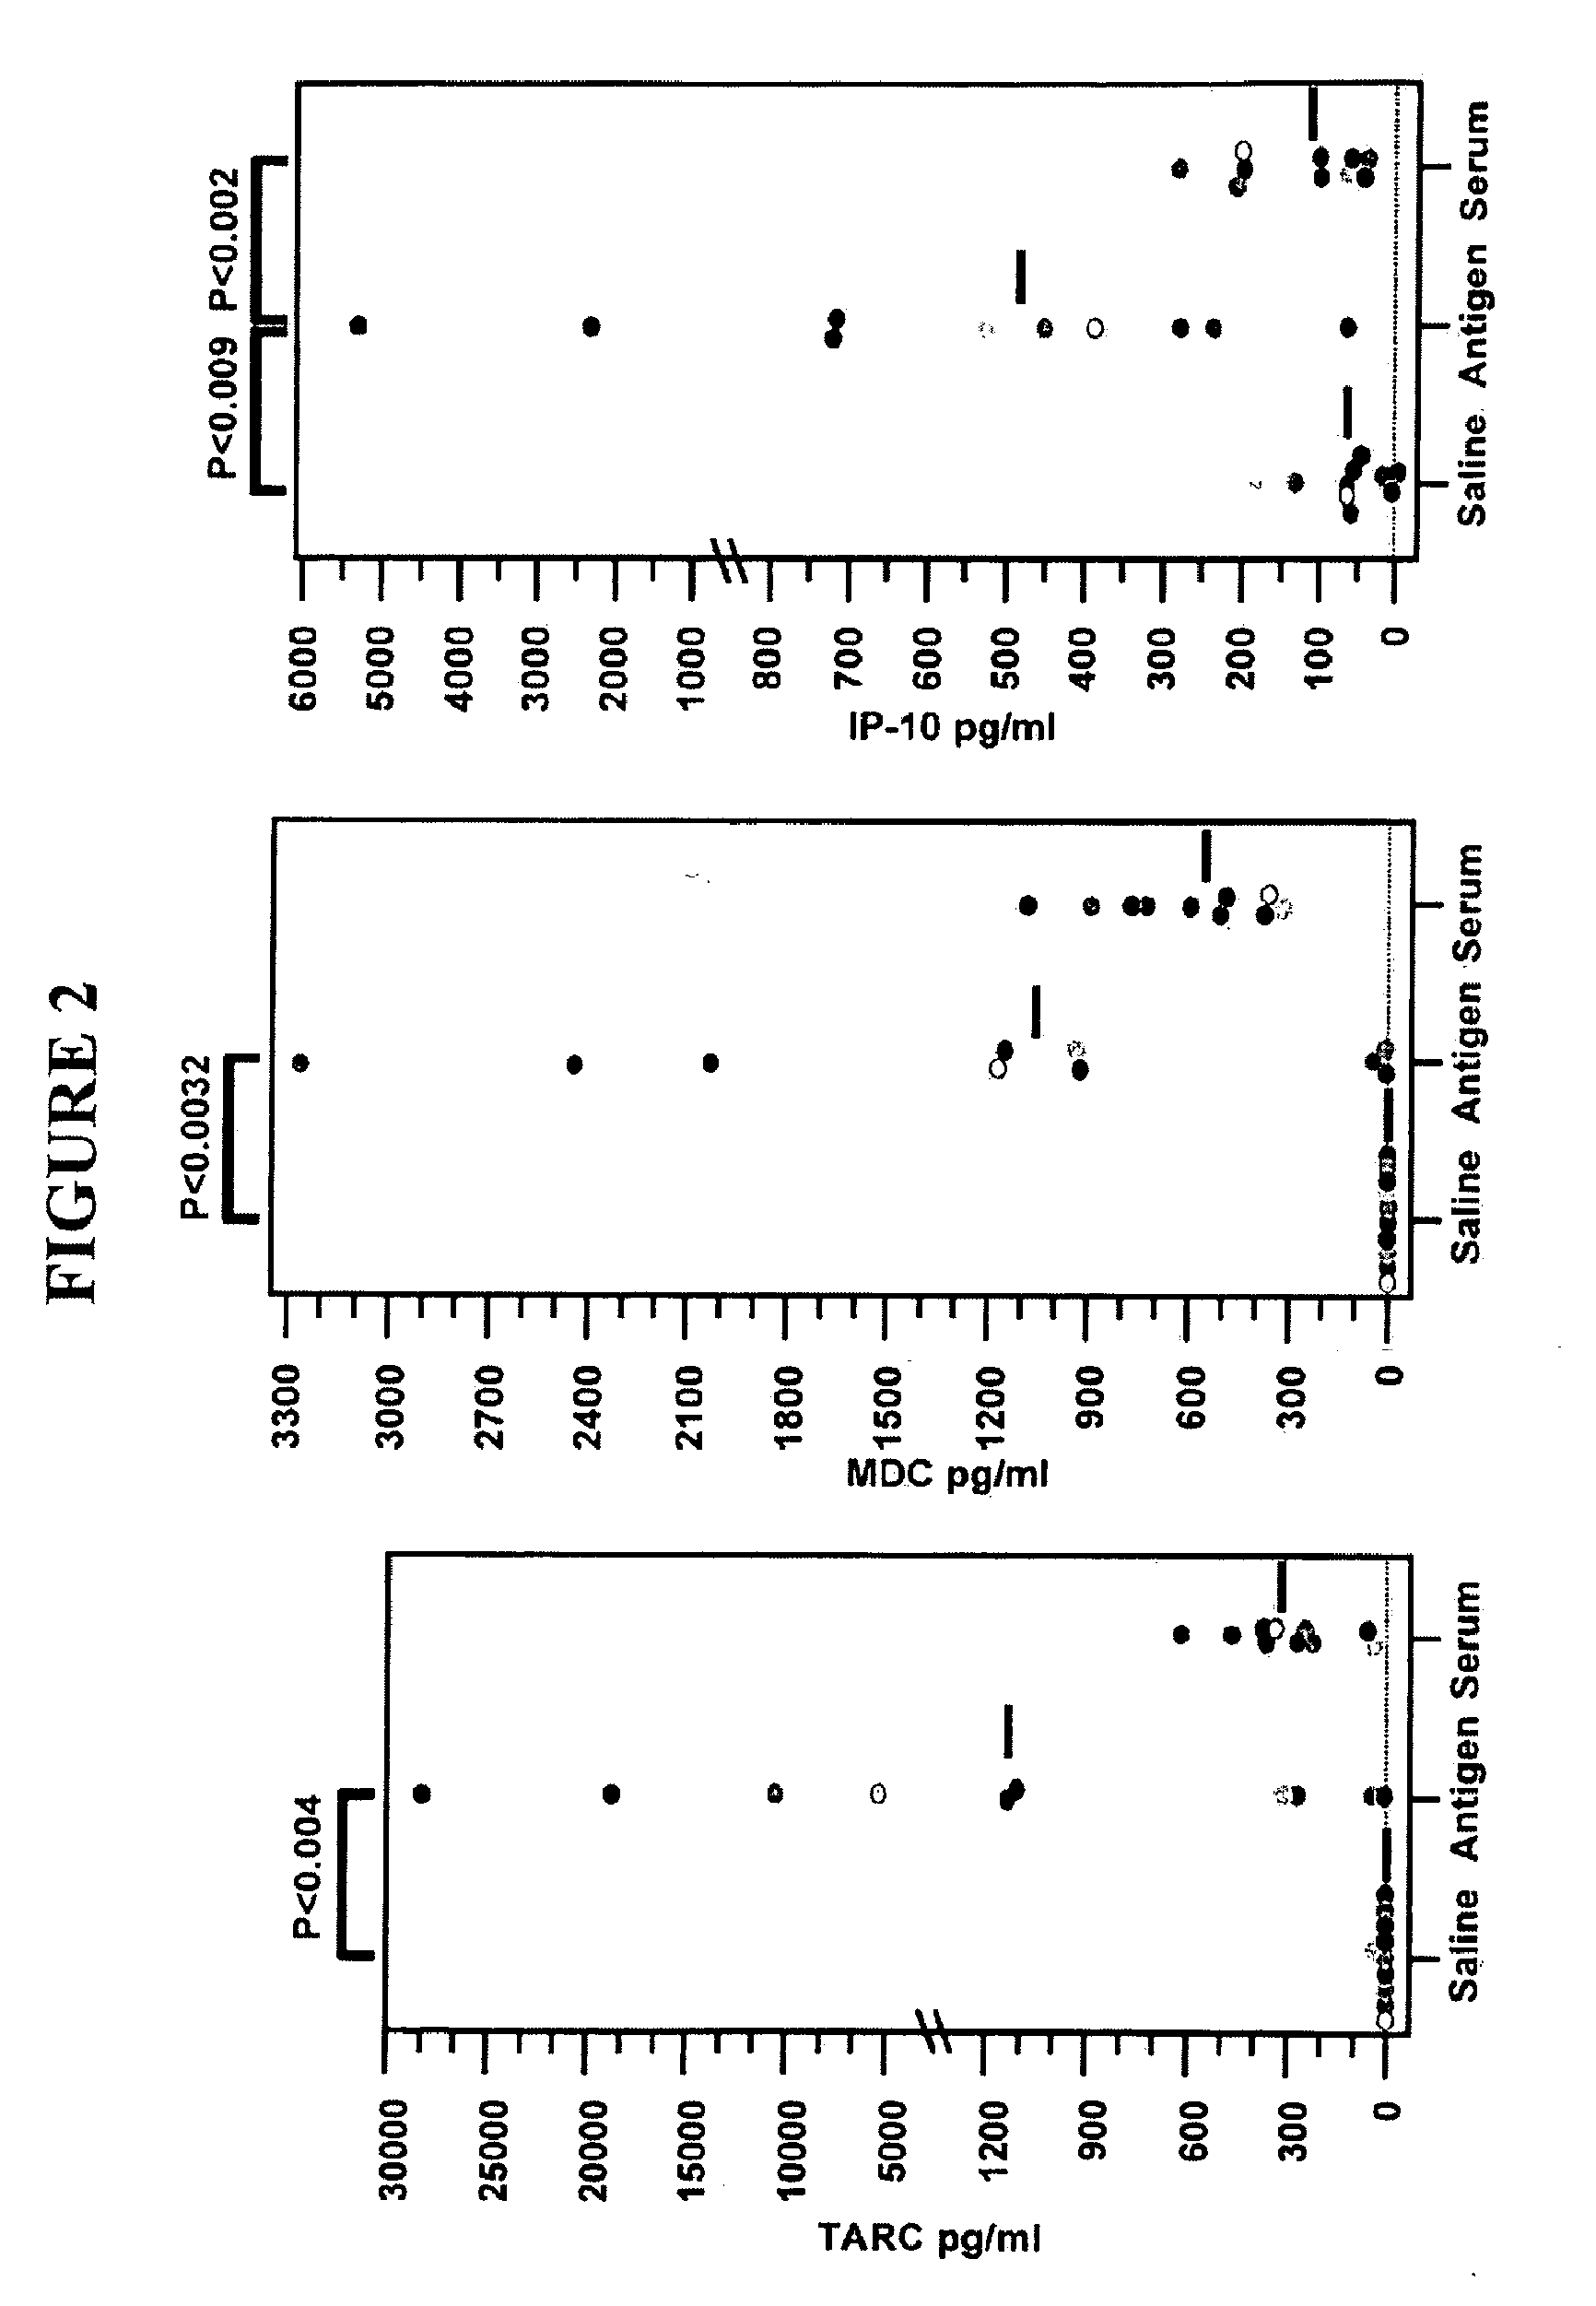 Method of diagnosing and treating asthma